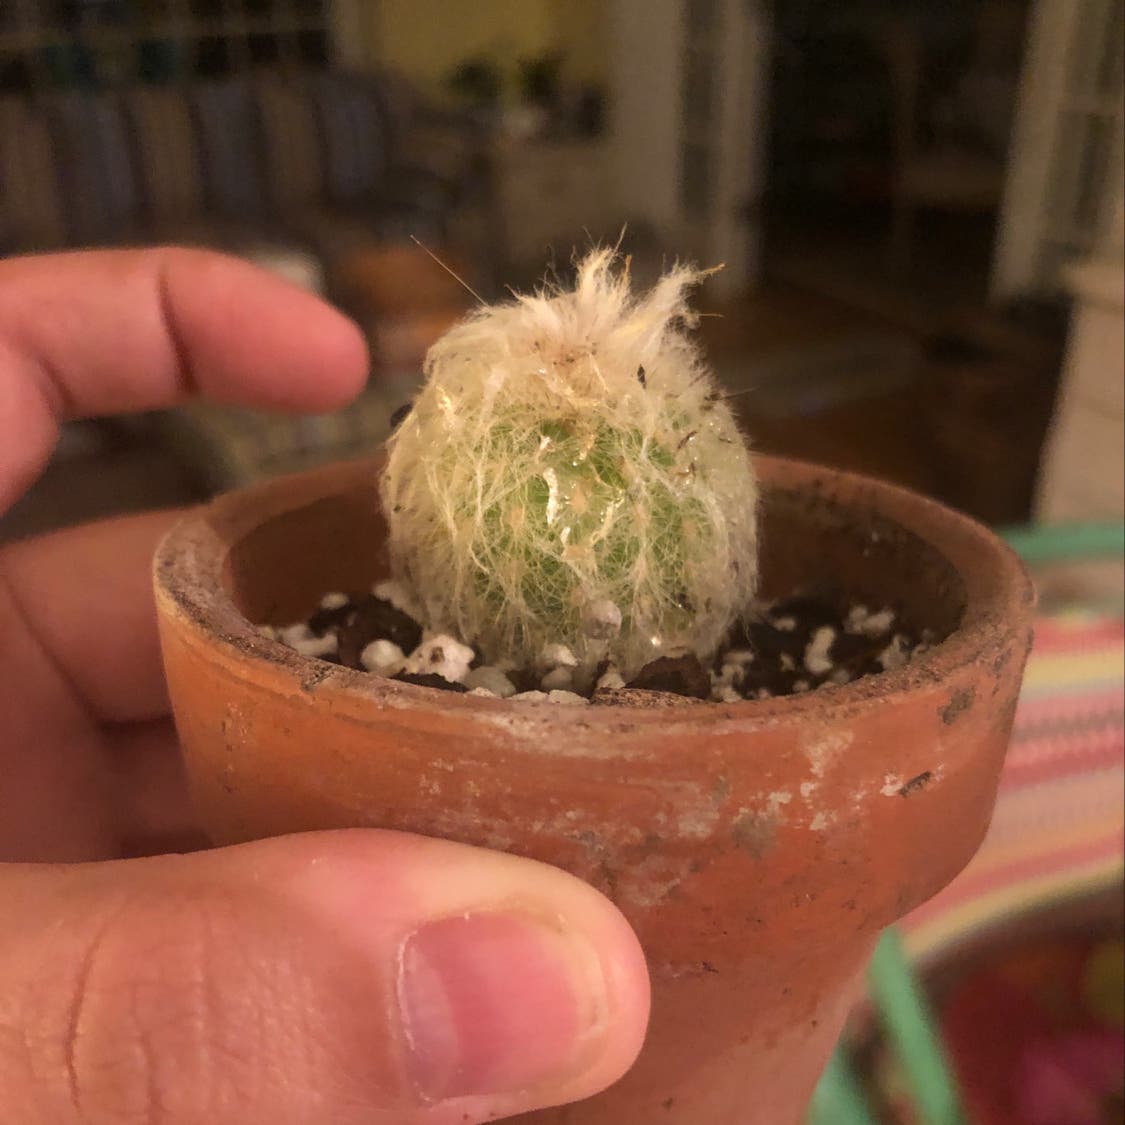 A small Hooked Cactus in a terracotta pot with white fuzzy growth, held by a hand.